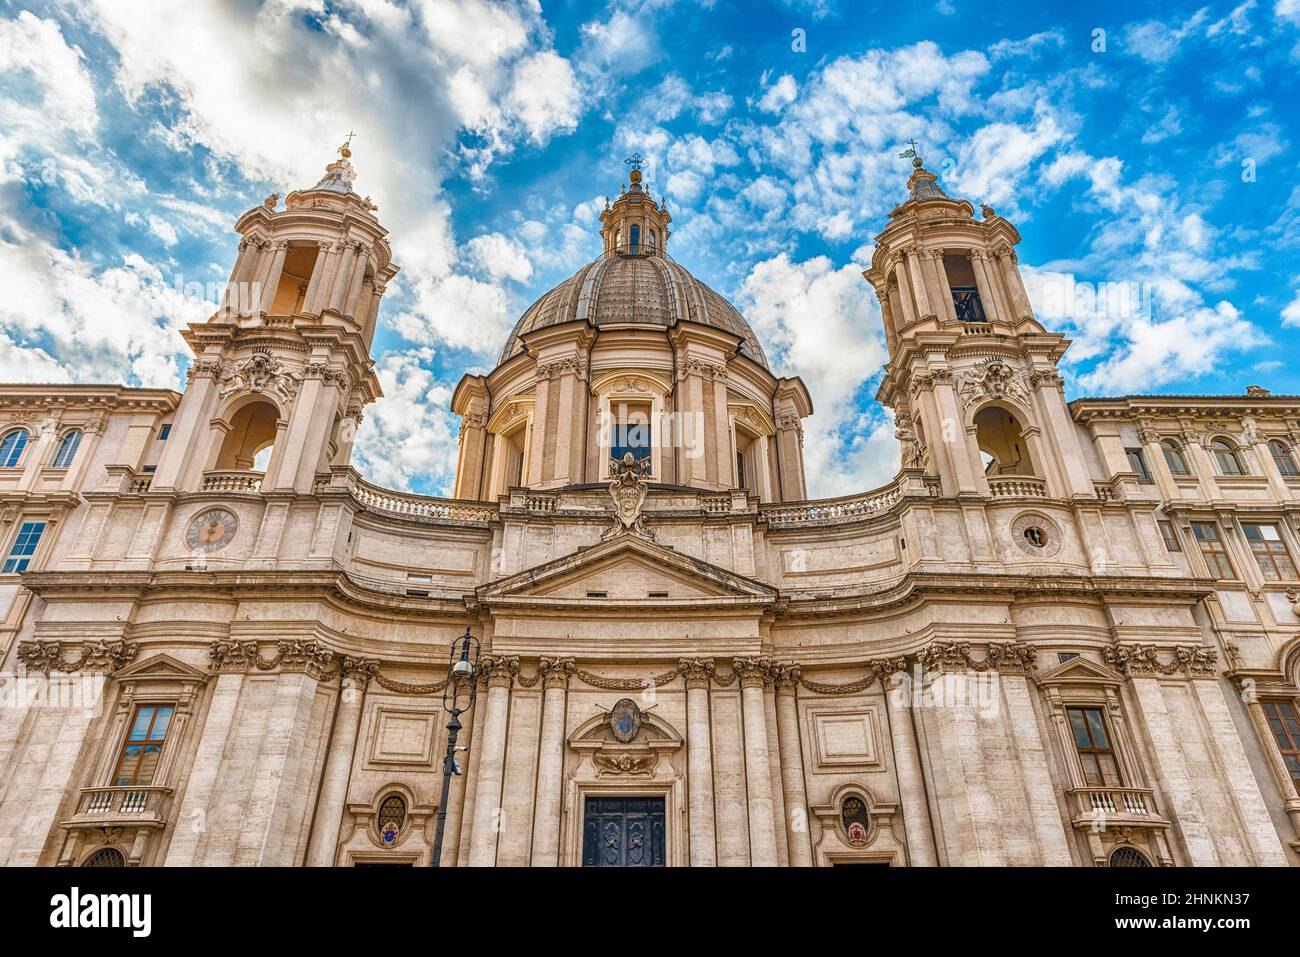 Facade of Sant'Agnese in Agone Church, Rome, Italy Stock Photo